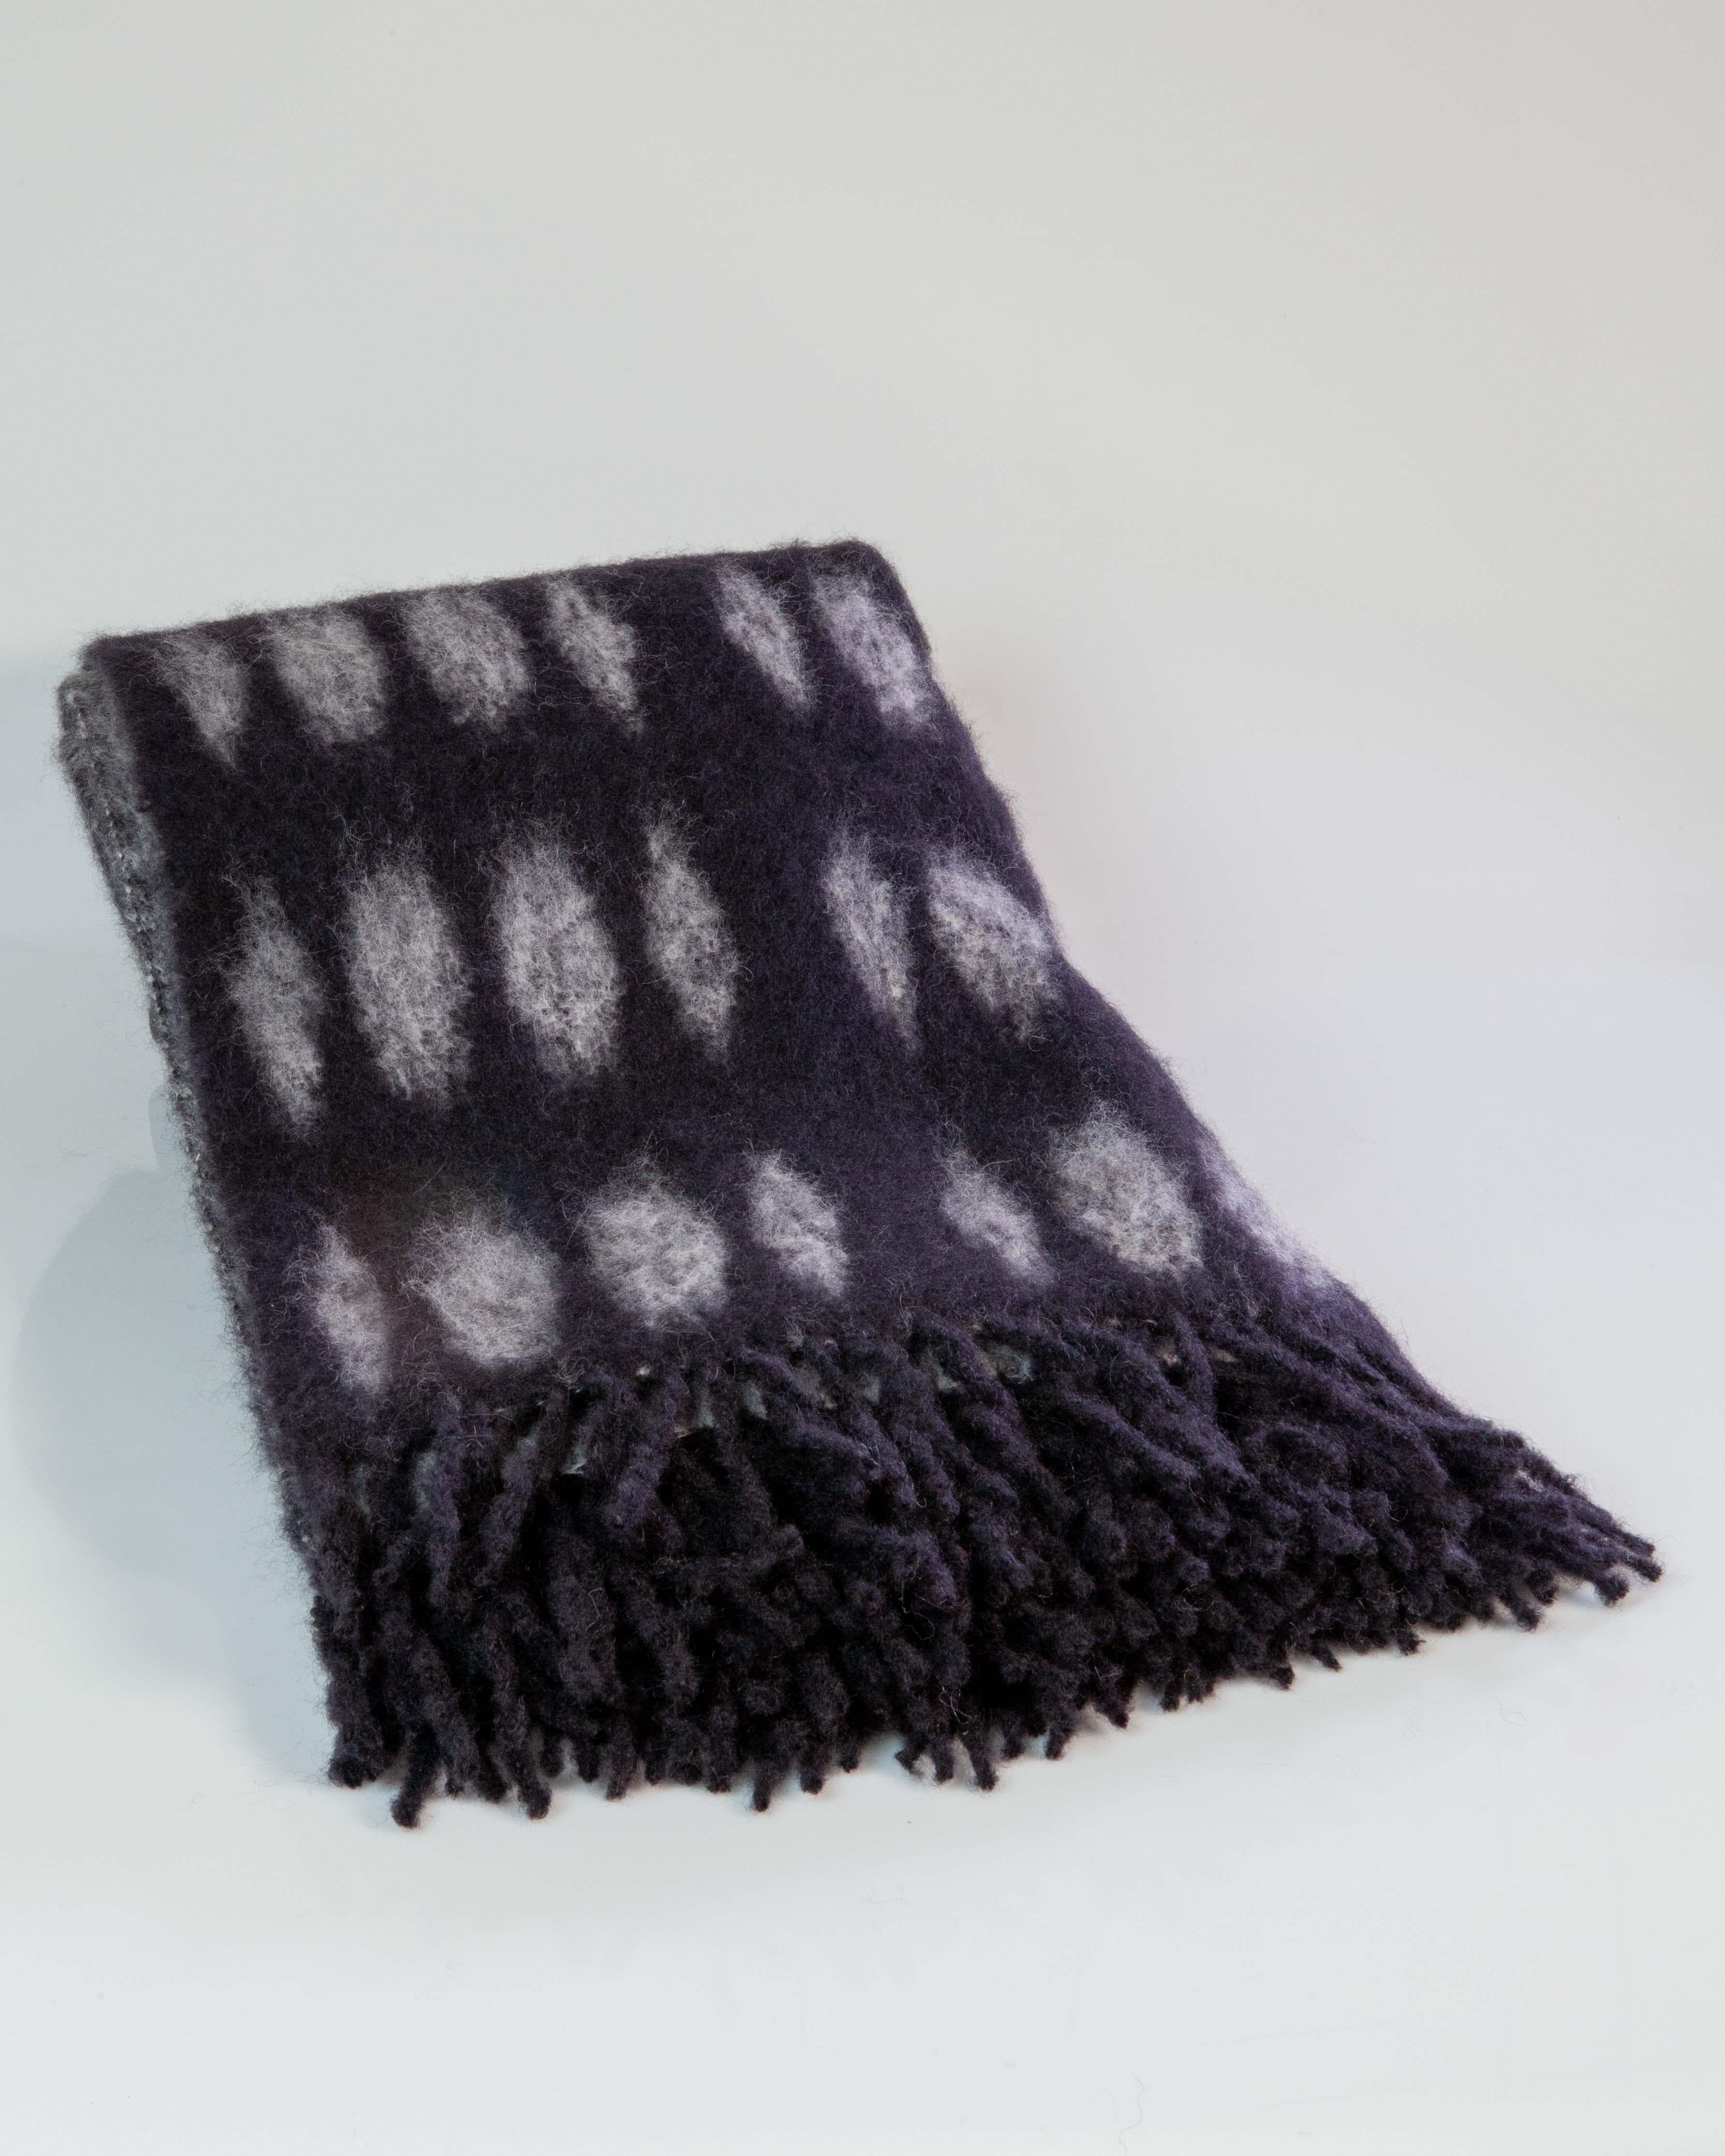 Mantas Ezcaray was founded in 1930 in La Rioja, Northern Spain, by Cecilio Valgañón, who transformed the hand loom processes of turning woolen cloth into handkerchiefs, scarves, shawls and blankets, in stock.
Their master craftsmen use only the